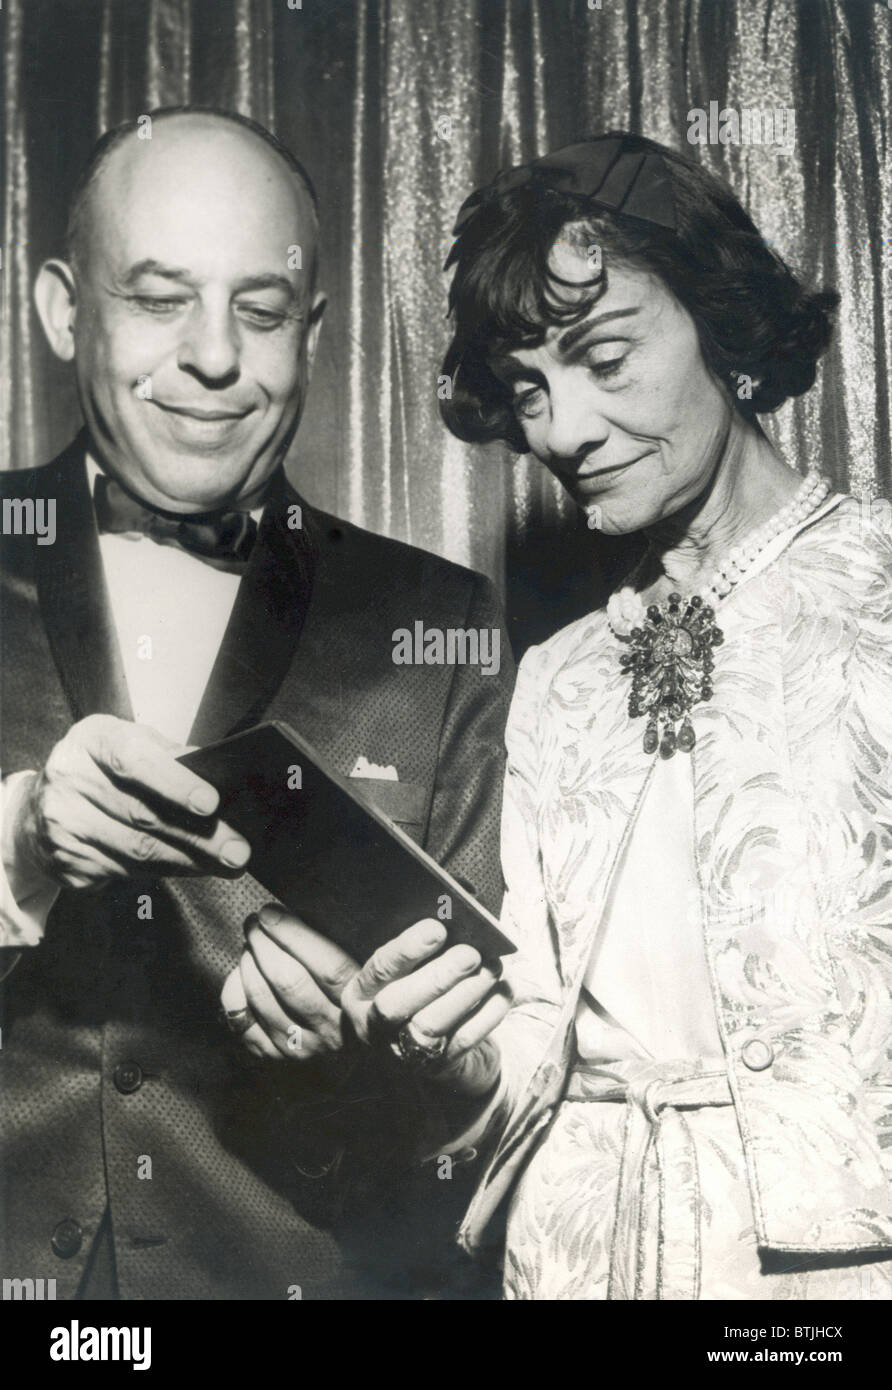 GABRIELLE 'COCO' CHANEL, being presented an award, c. early 1960s (date stamped on the press photo is 1965) Stock Photo